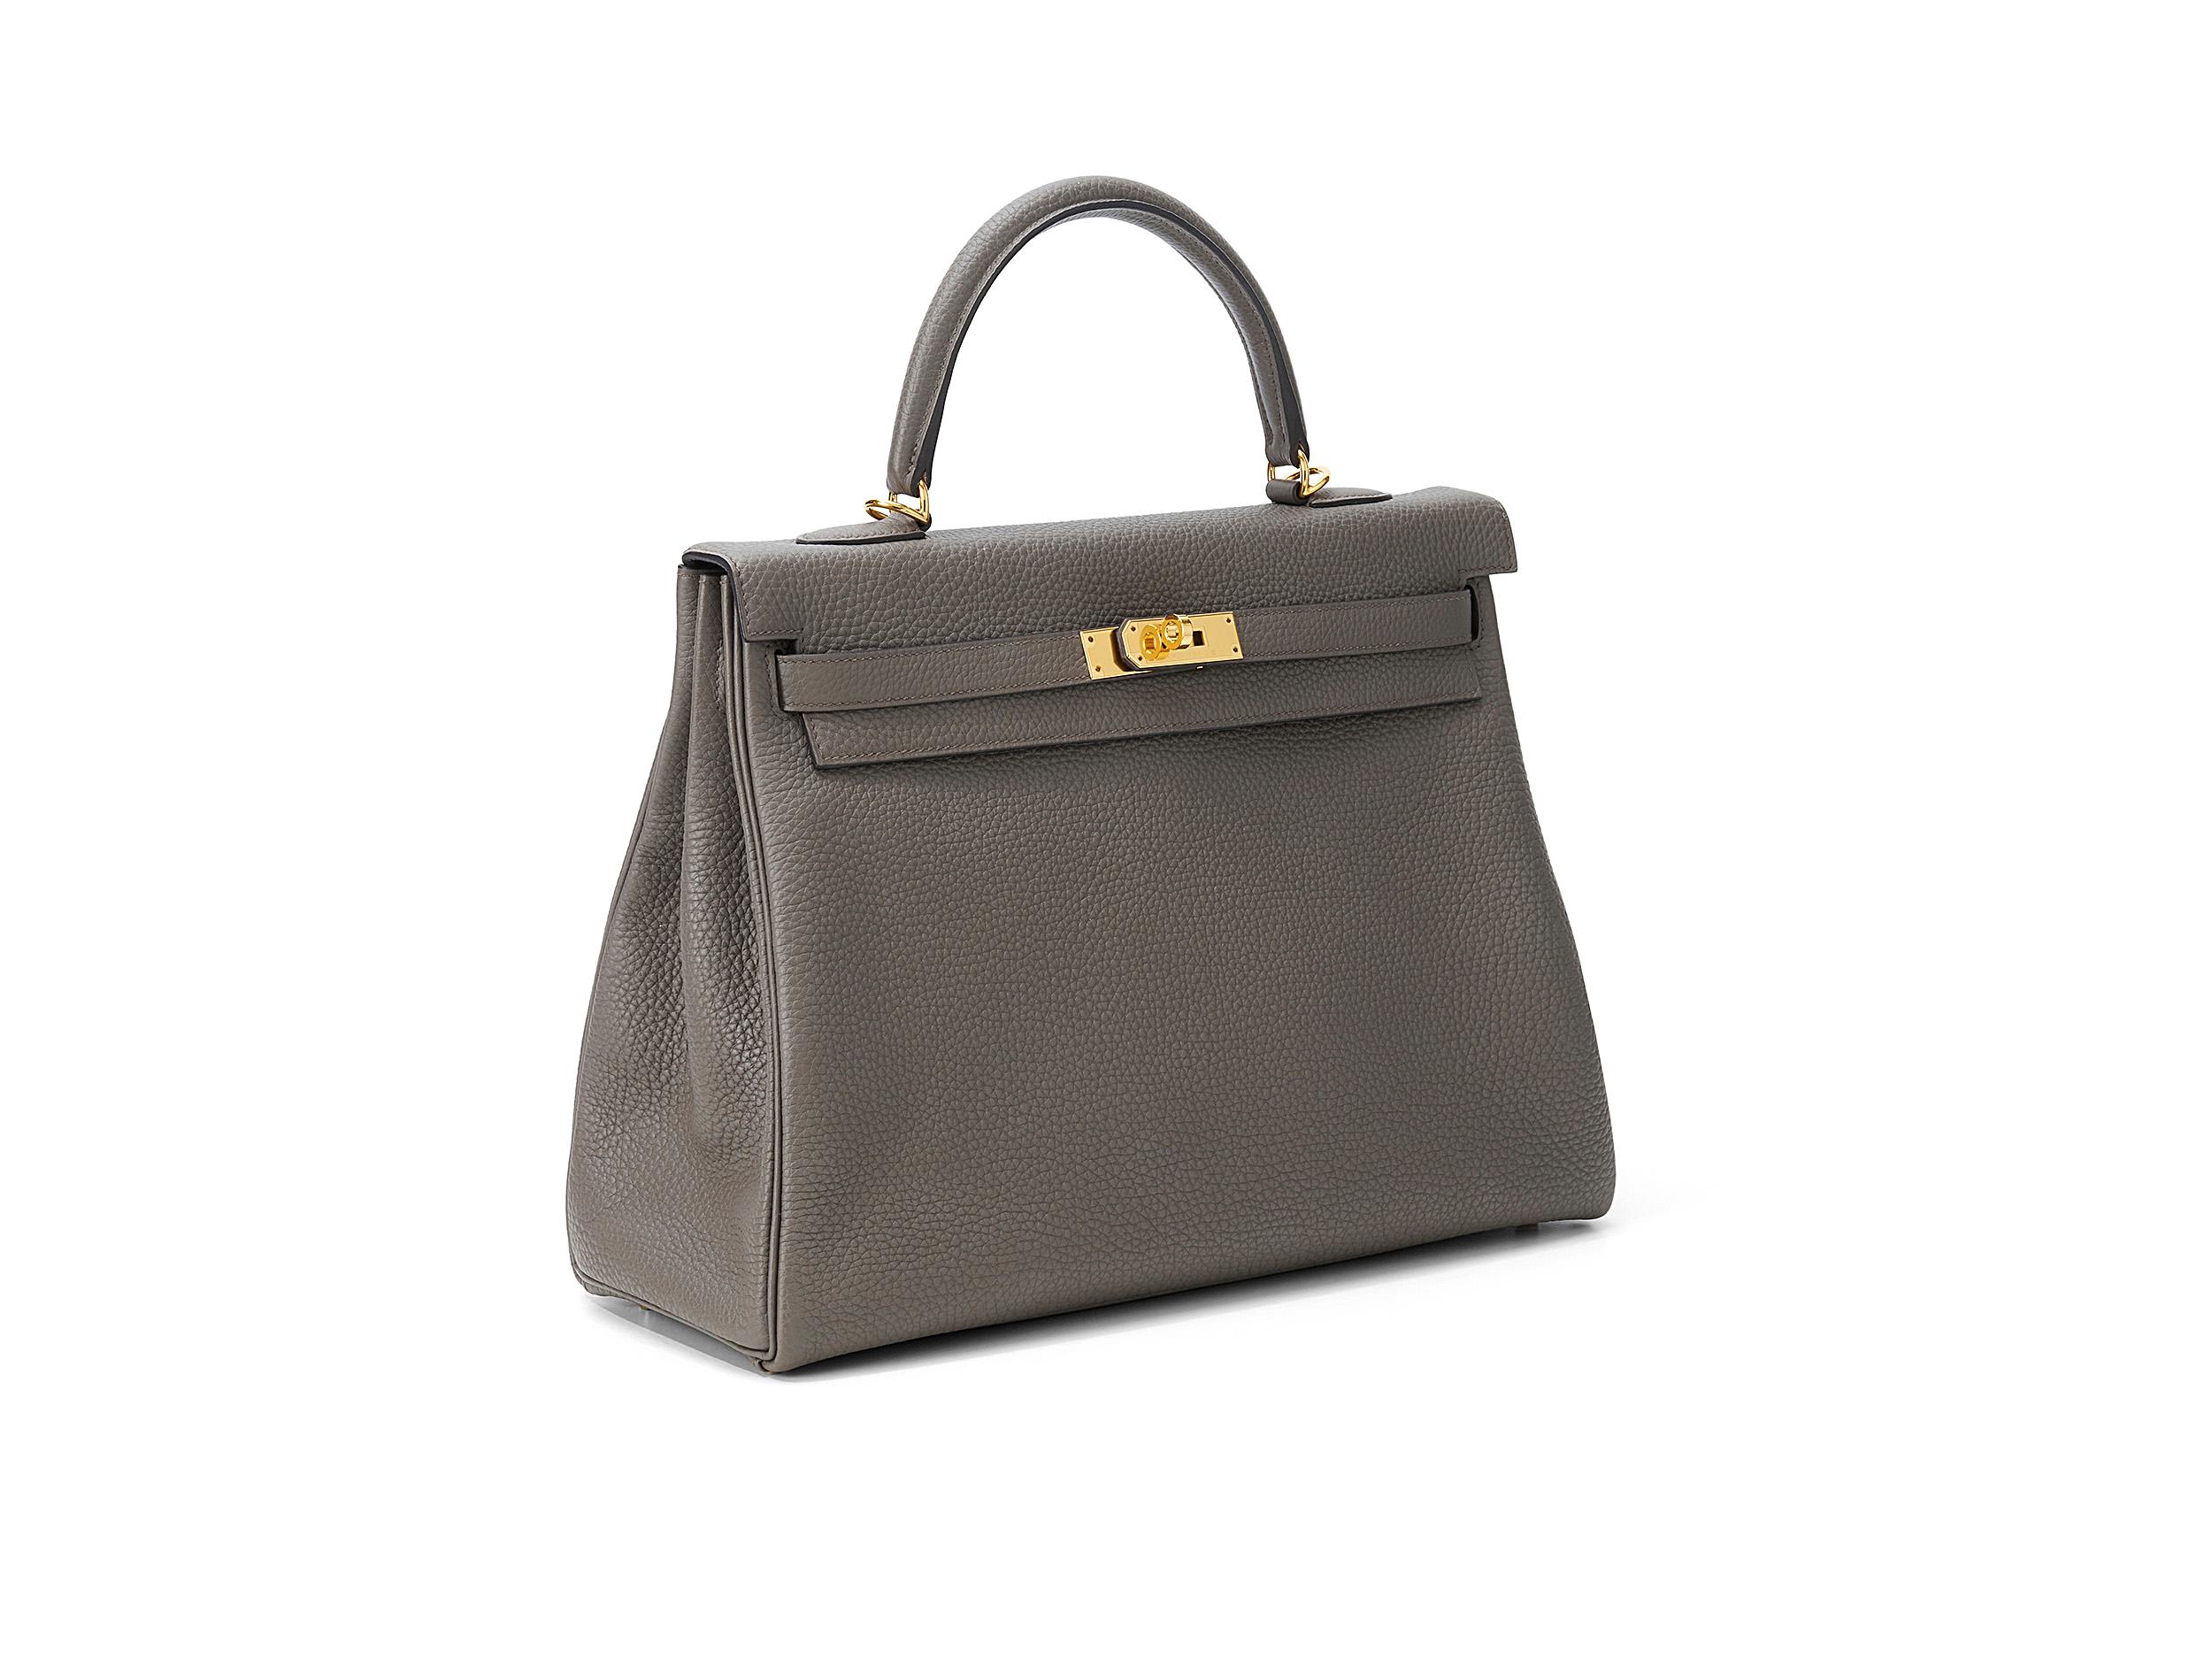 Hermès Kelly 35 in gris etain and togo leather with gold hardware. The bag is unworn comes as full set including the original receipt.  
Stamp D (2019) 

